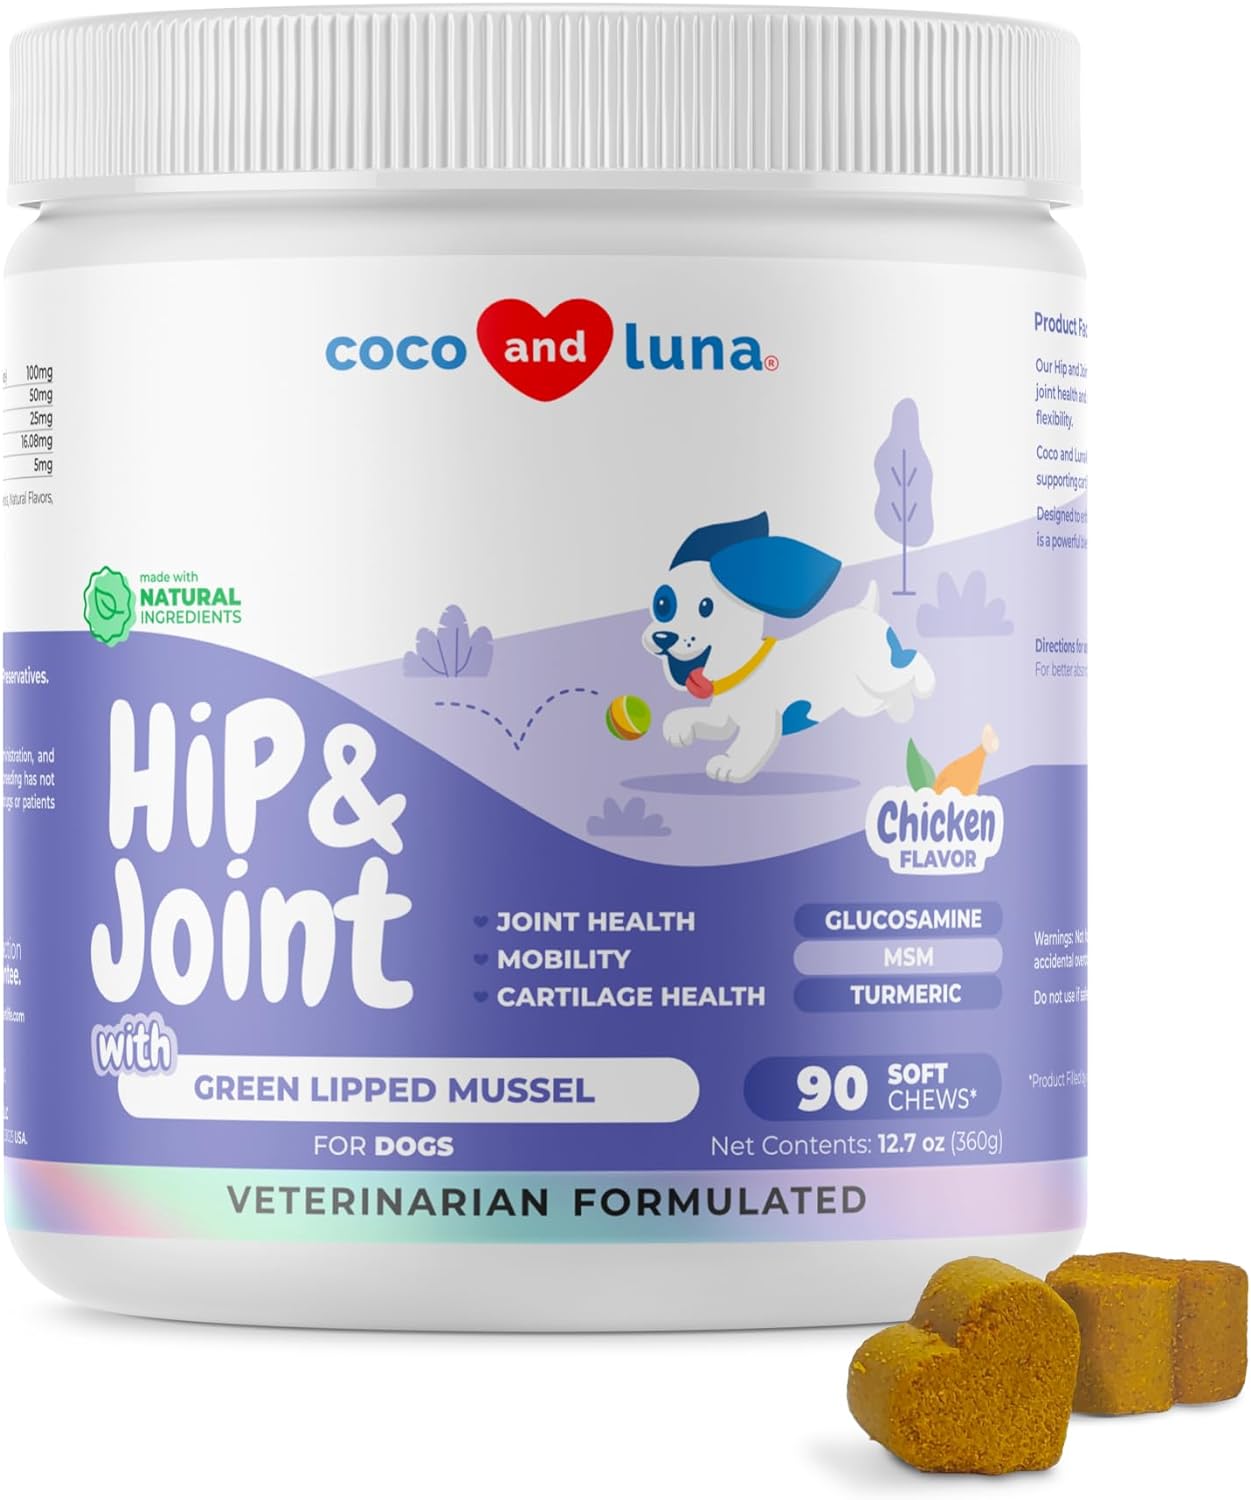 Joint Supplement for Dogs - 90 Soft Chews - with Green Lipped Mussel, Glucosamine, Turmeric, Fish Oil, MSM and Yucca Schidigera (Soft Chews)